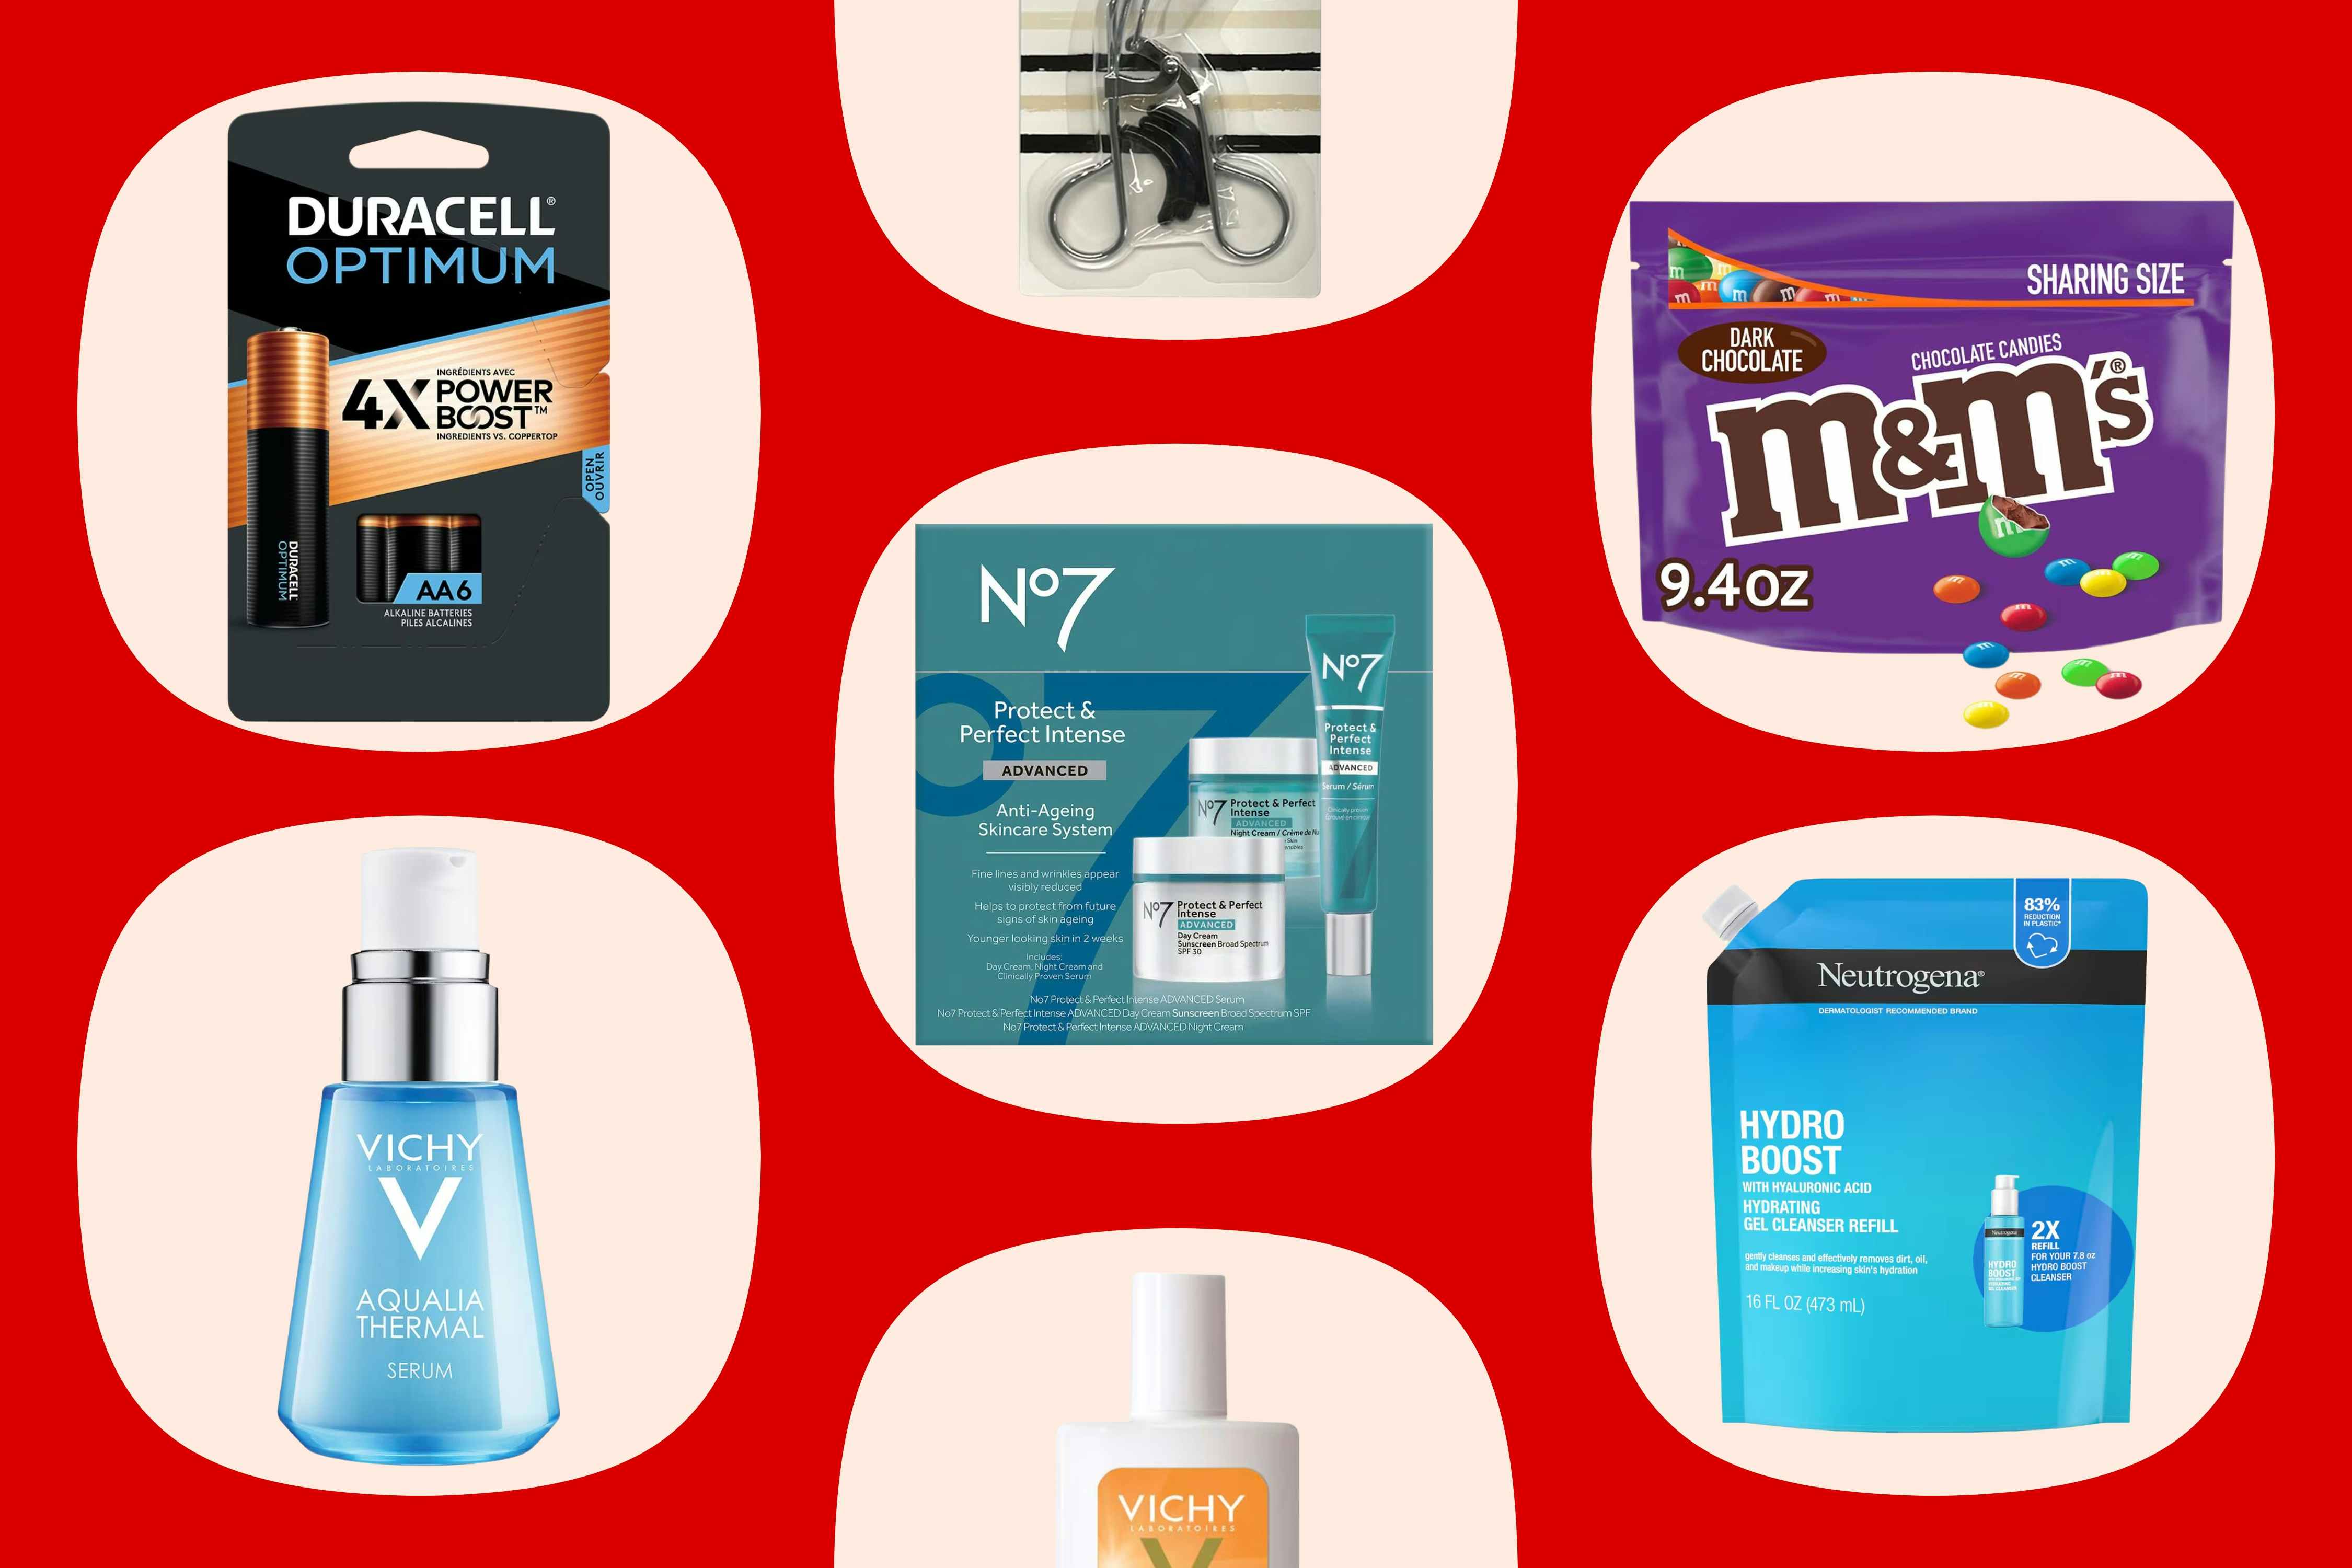 Online Walgreens Clearance Deals: $0.49 and Up